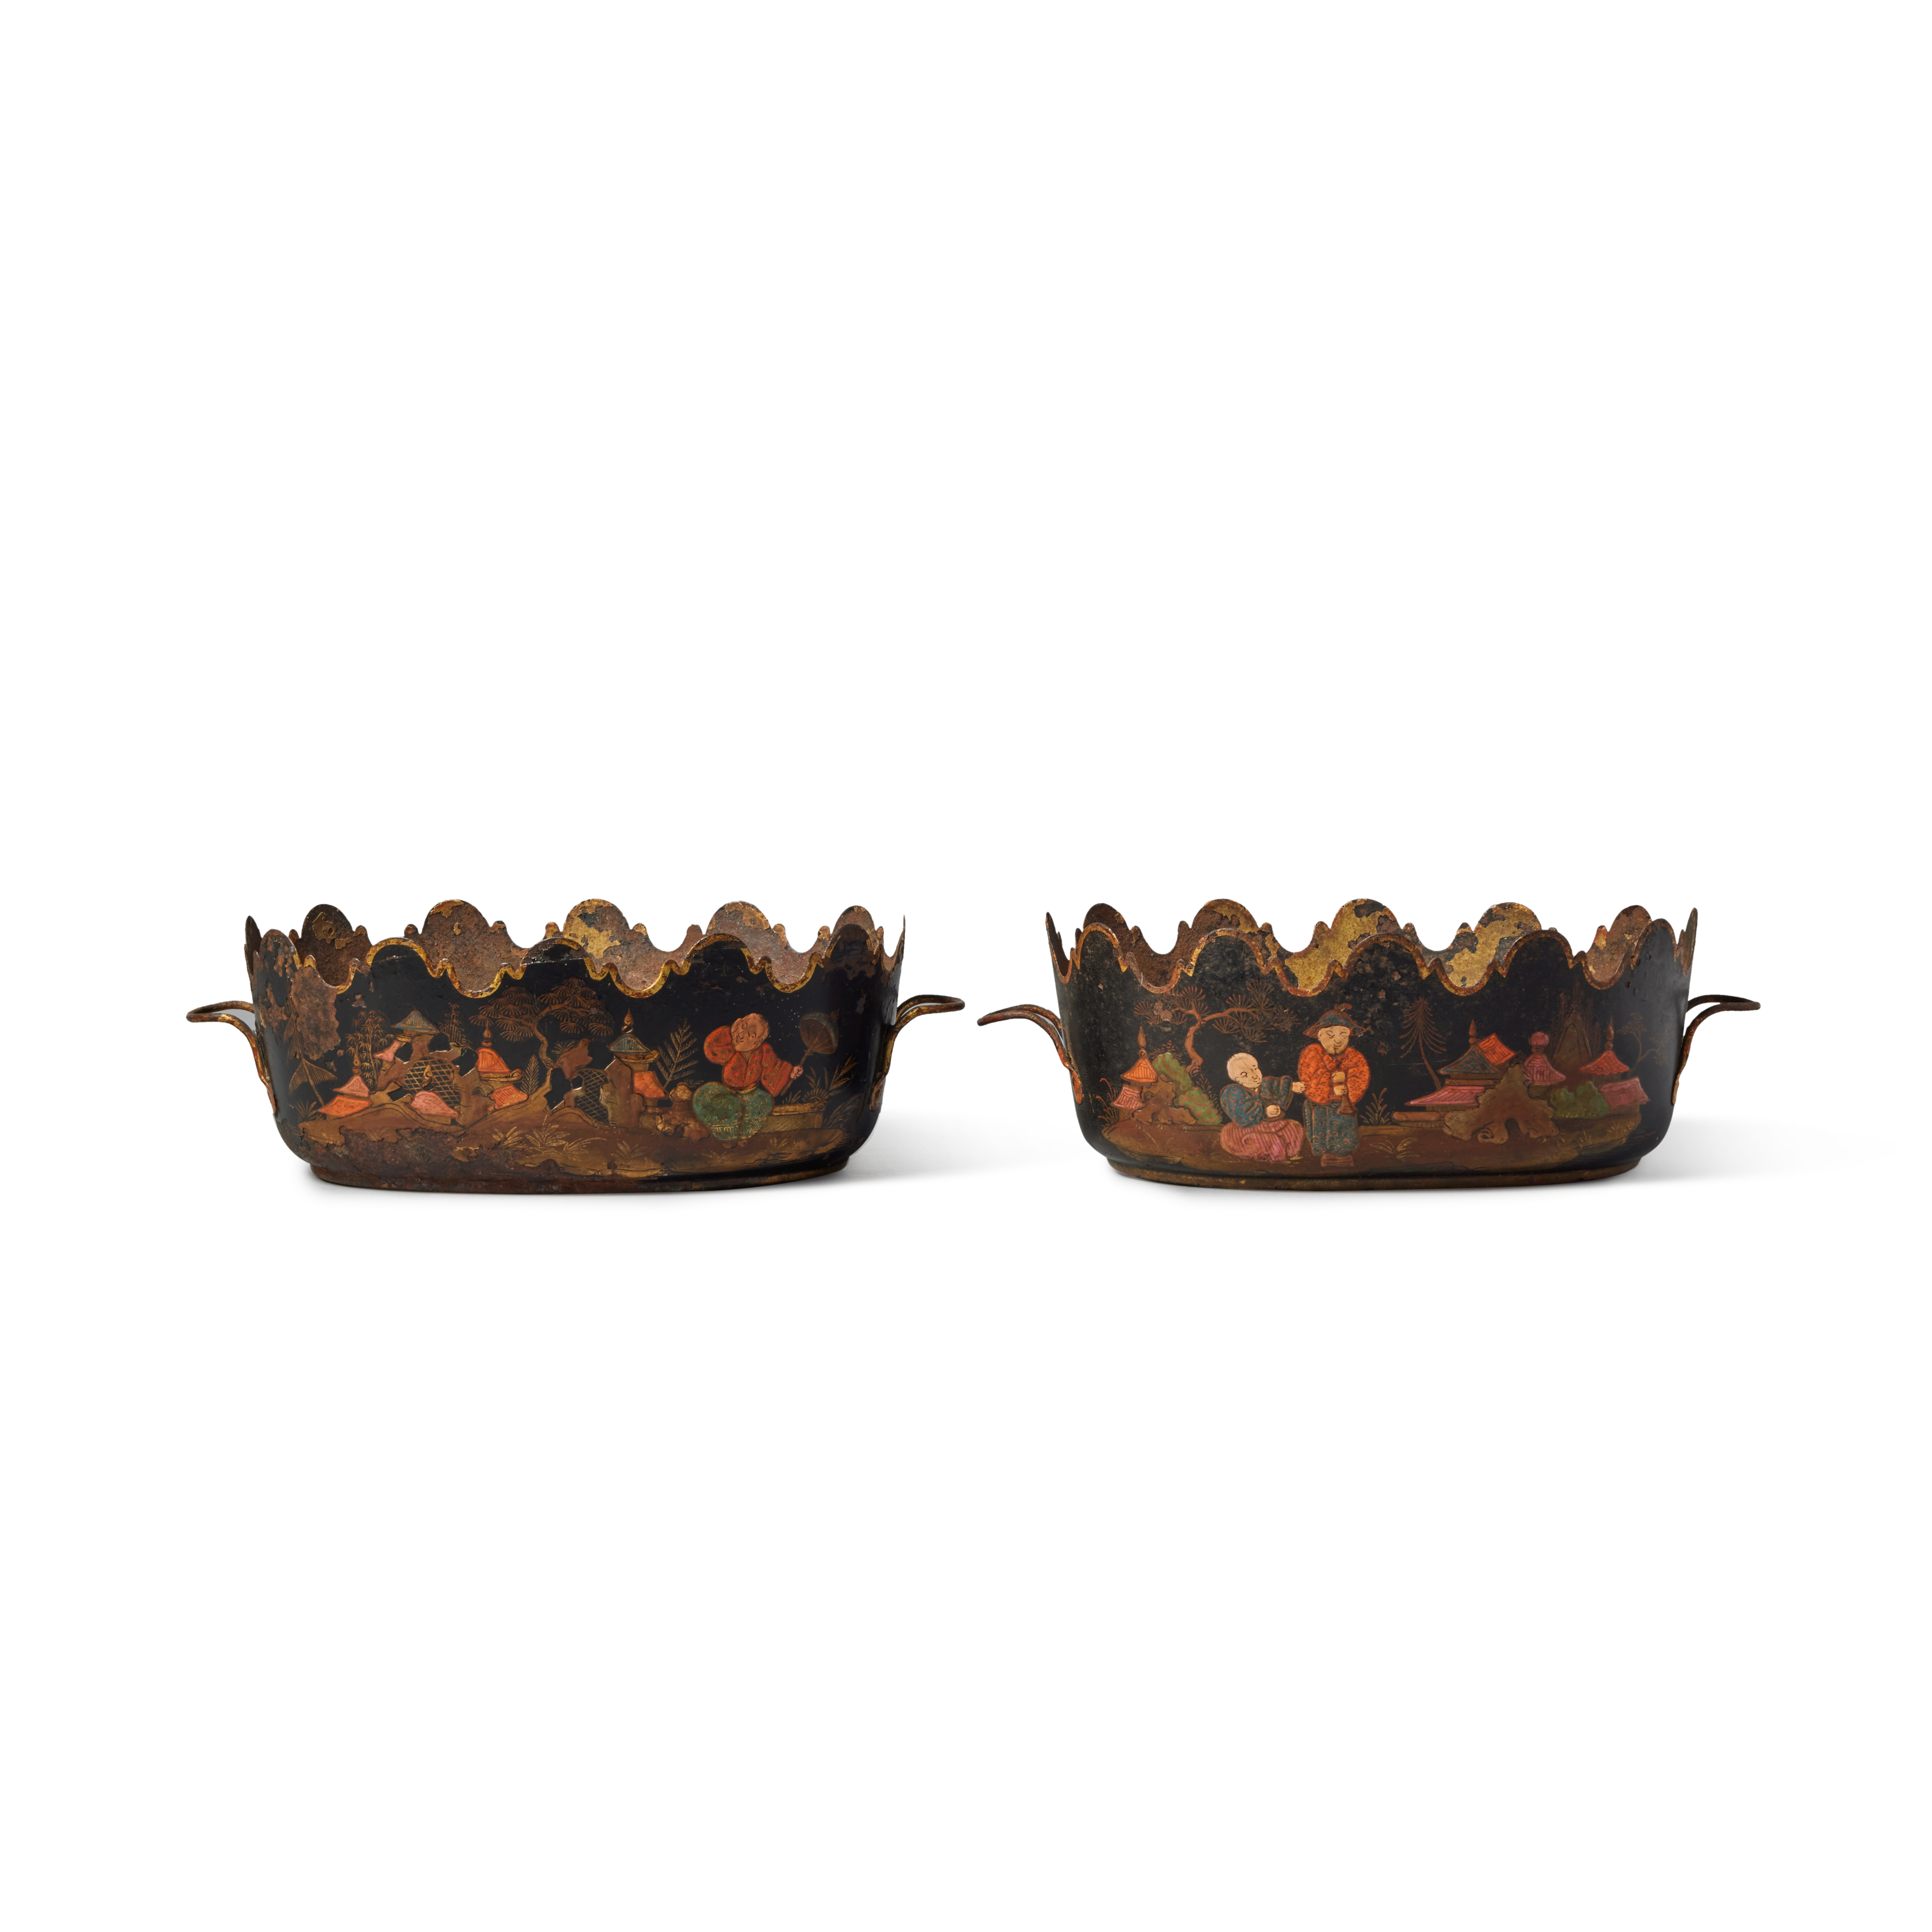 A Pair of Louis XVI Tôle-Peinte Two-Handled Verrieres, 18th/19th Century - Image 3 of 3